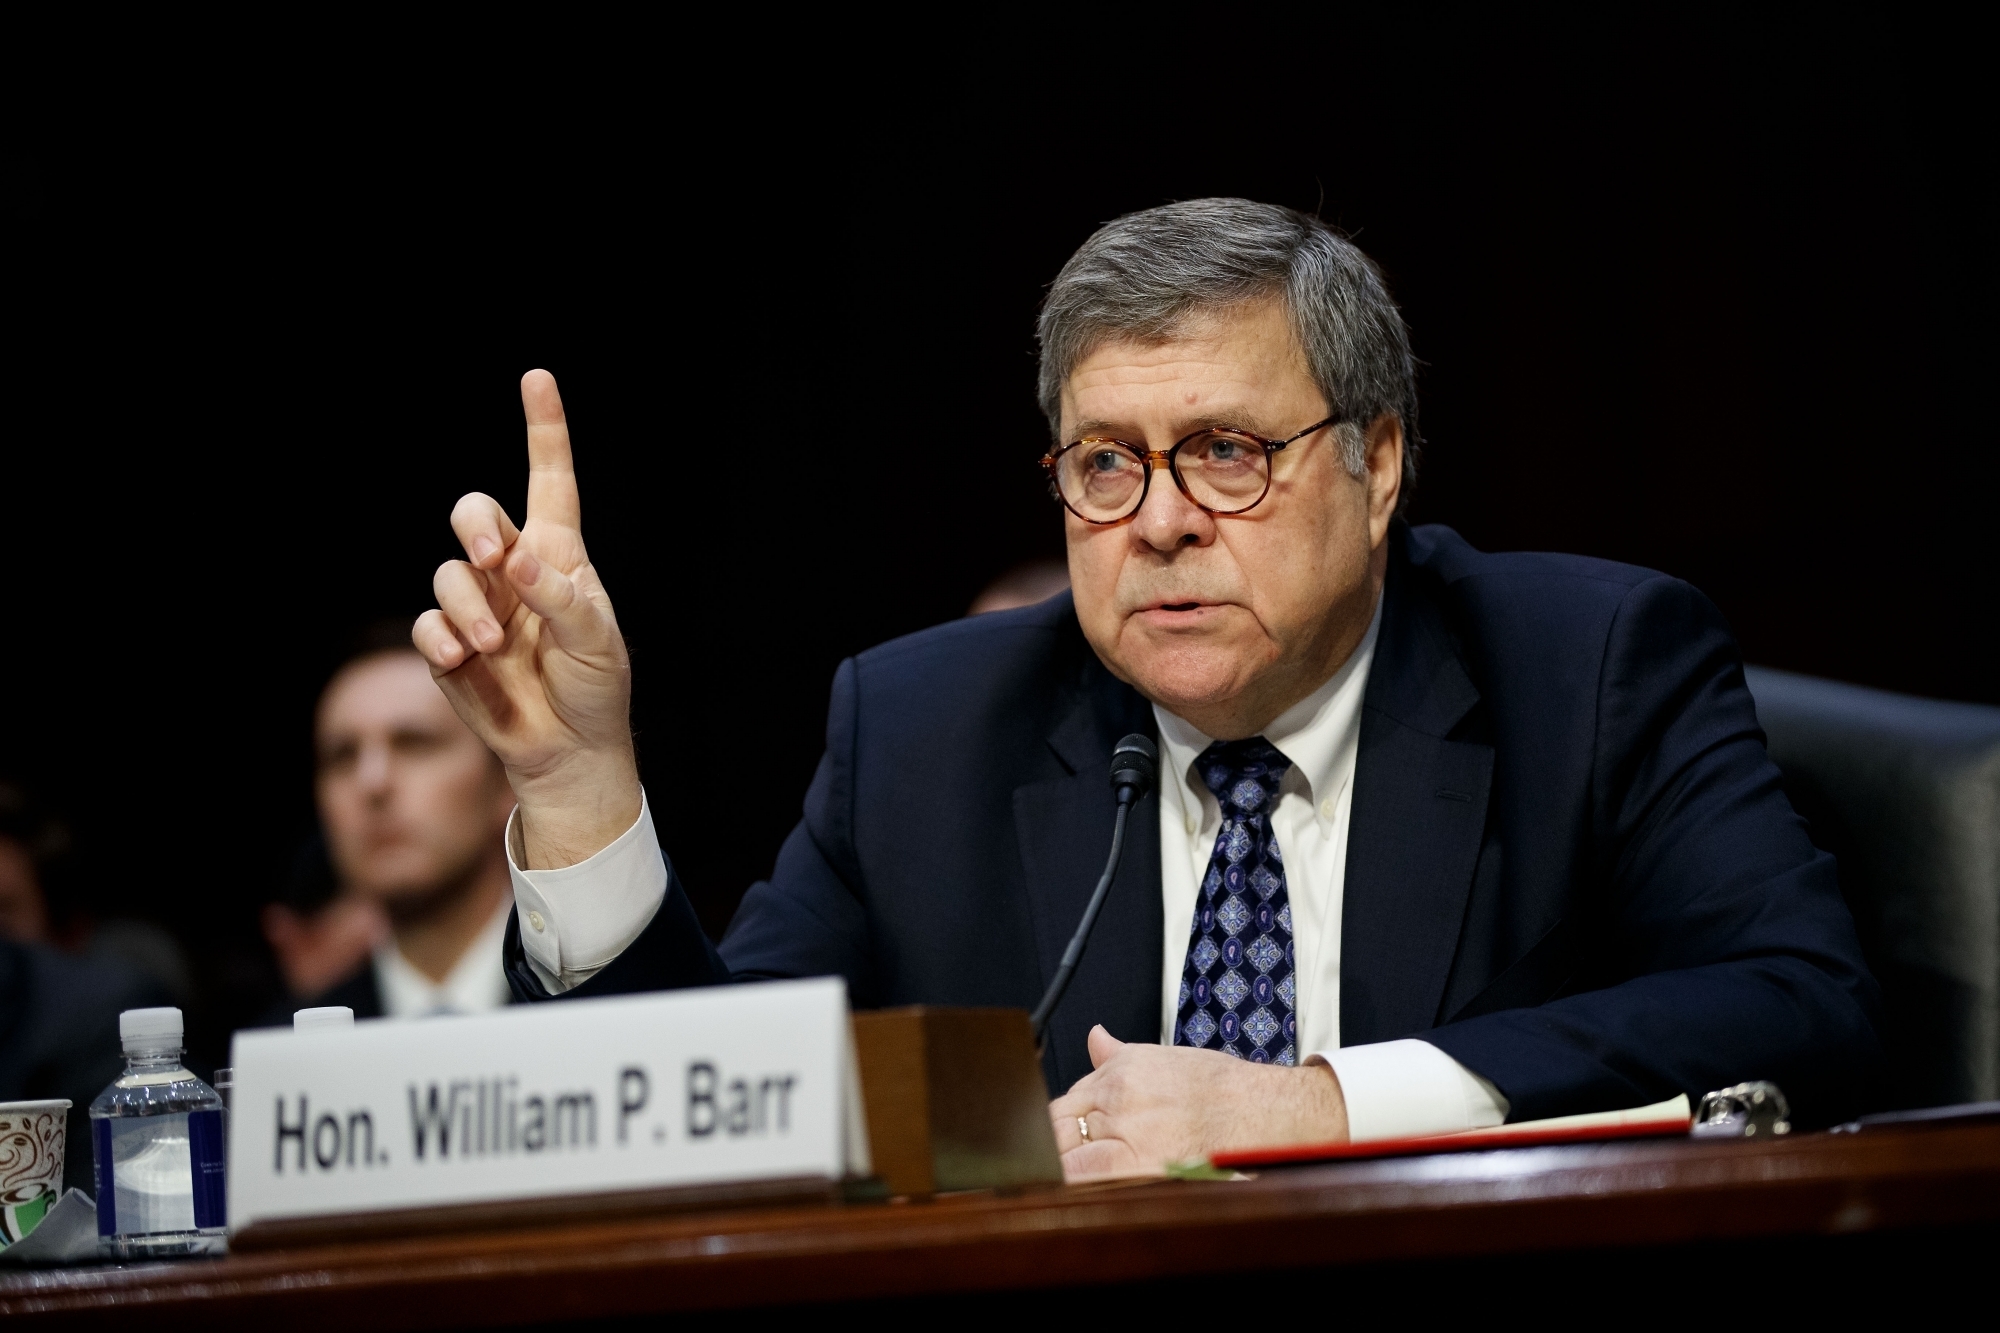 U.S. Attorney General Barr faces House scrutiny on handling of  protests, cases involving Trump allies